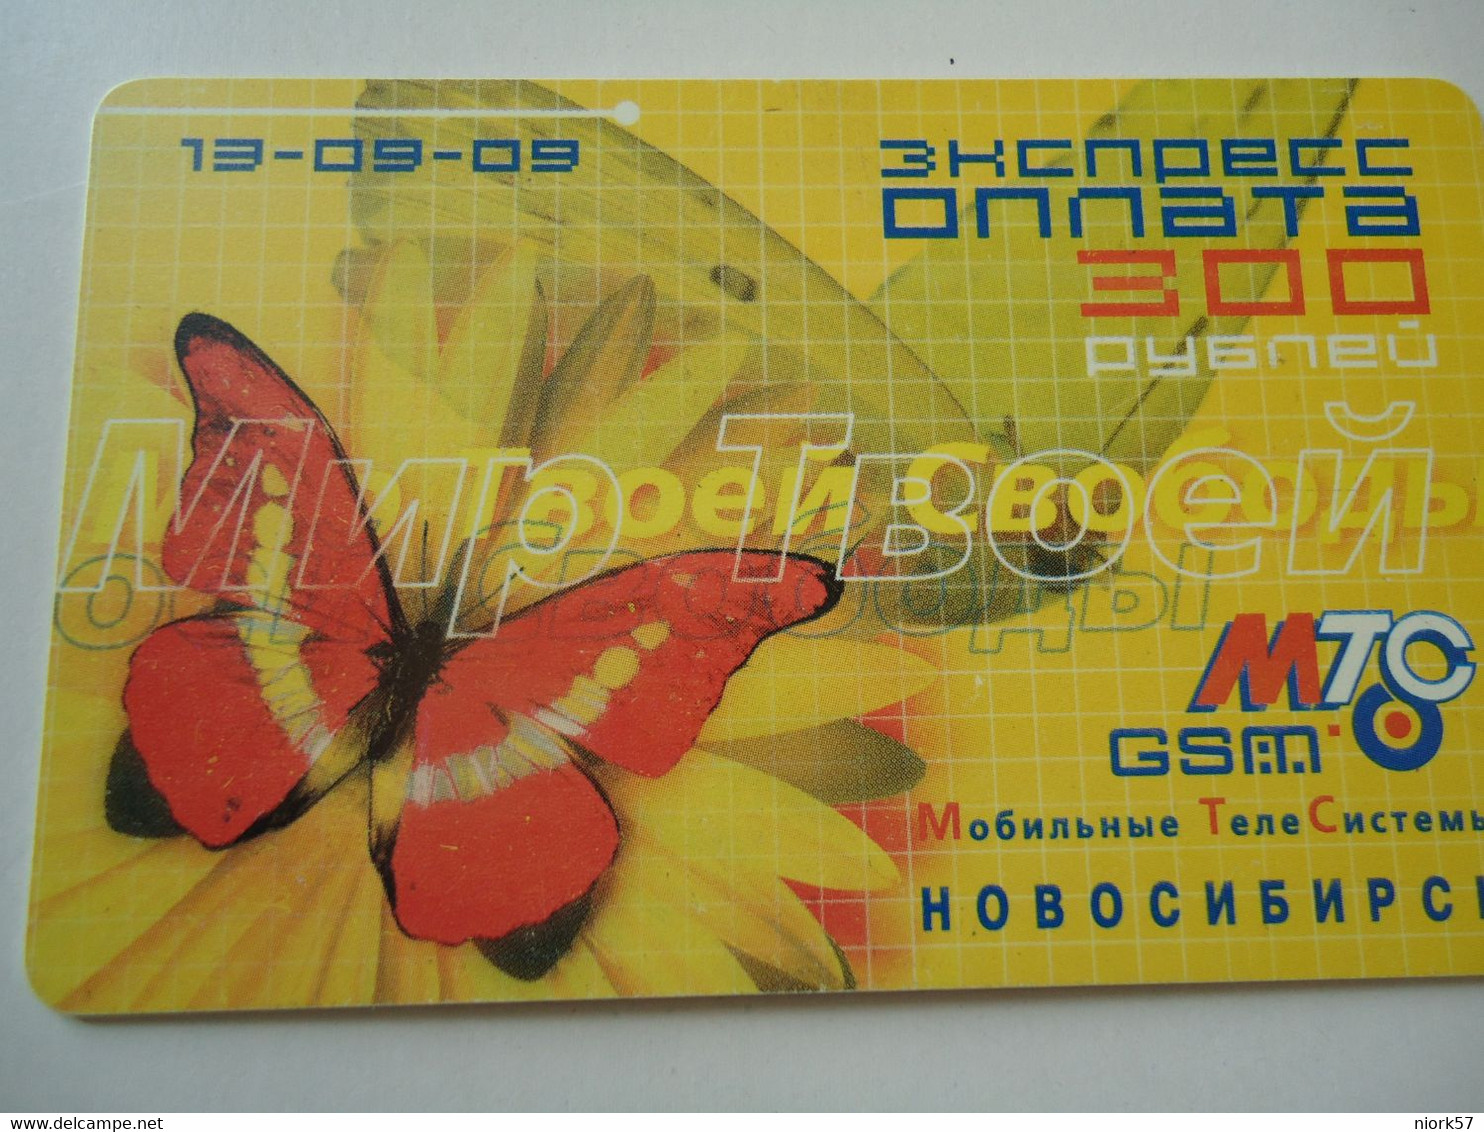 RUSSIA COUNTRIES  USED  CARDS  BUTTERFLIES  2 SCAN - Mariposas